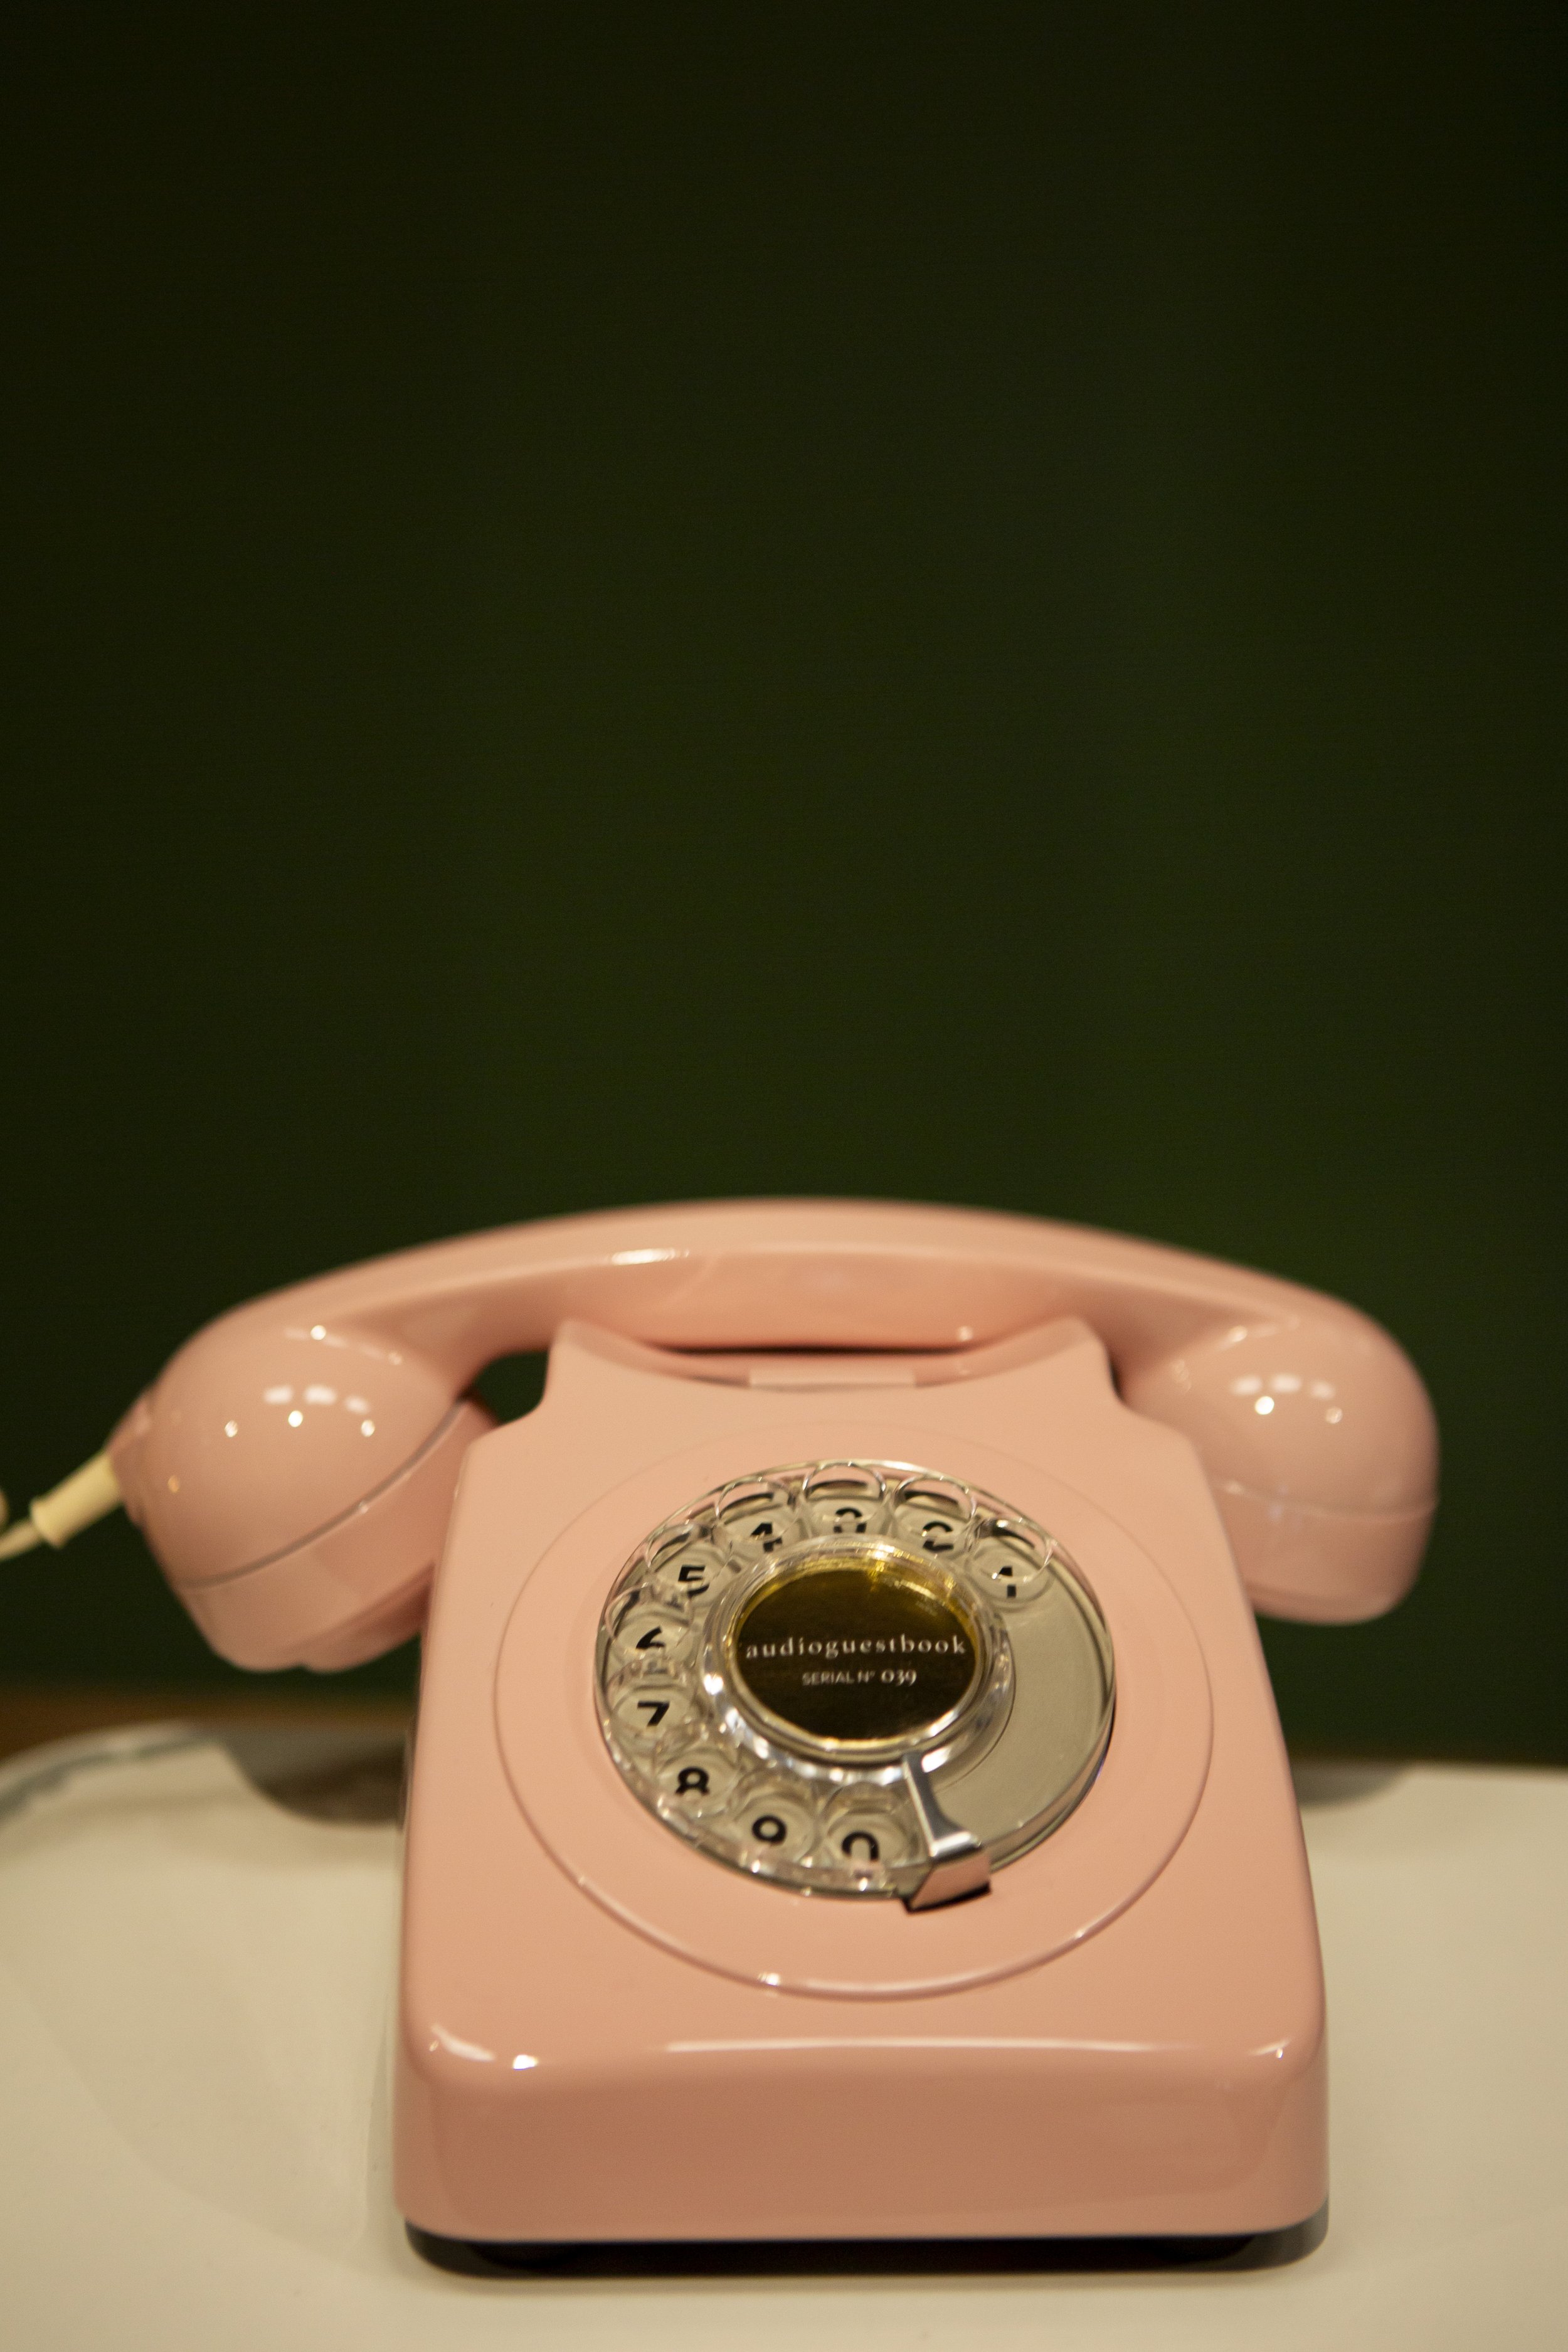  Retro pale pink telephone with audioguestbook monogram in the middle. 